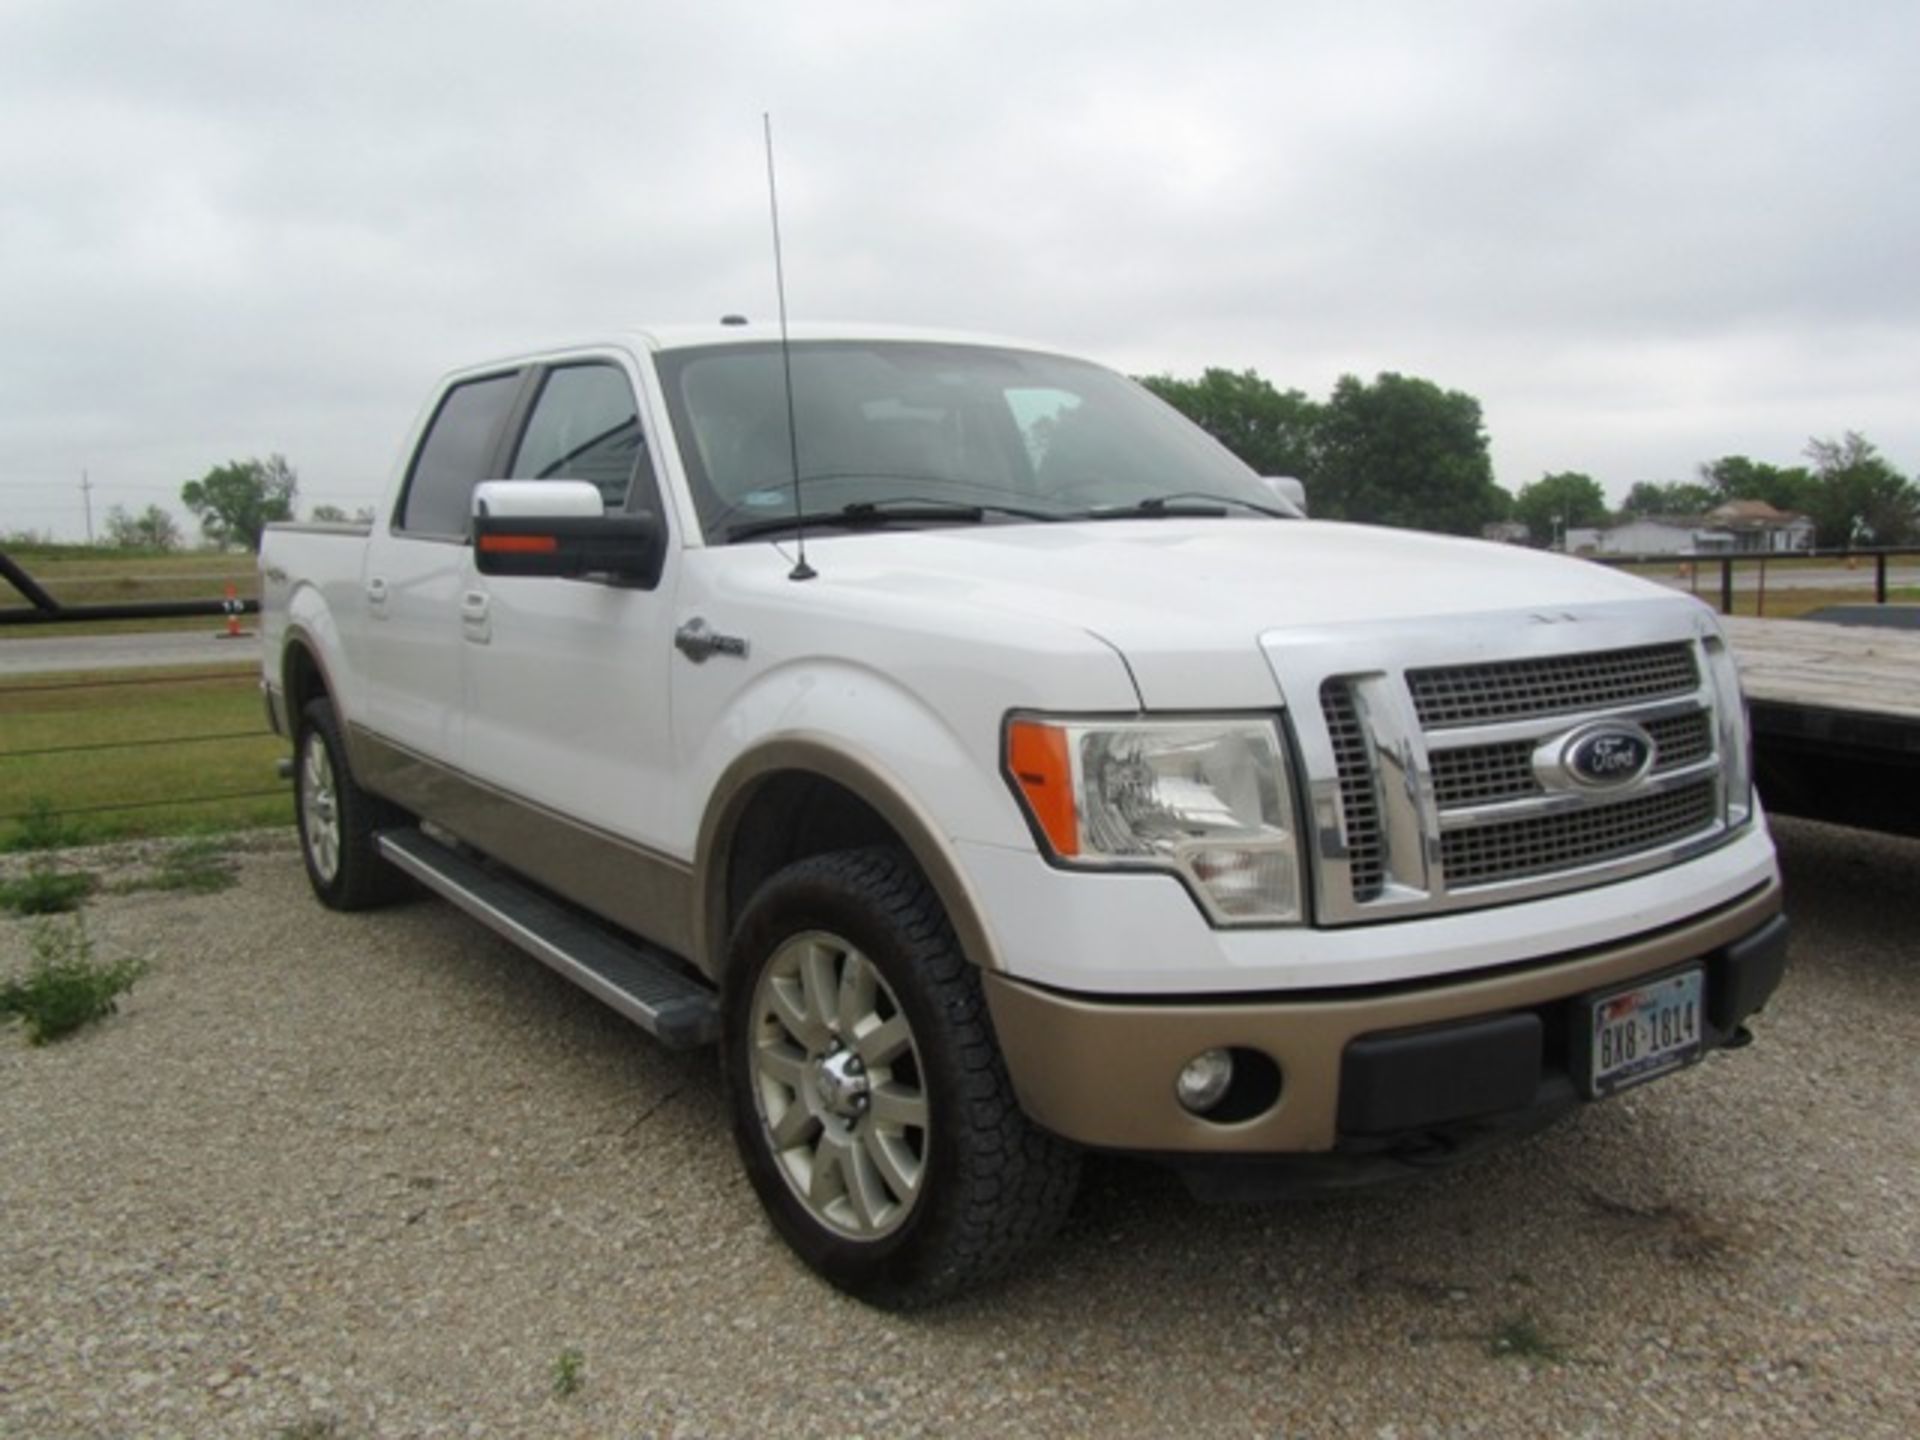 Ford F150 4X4 King Ranch Pick-Up Truck - Image 2 of 4